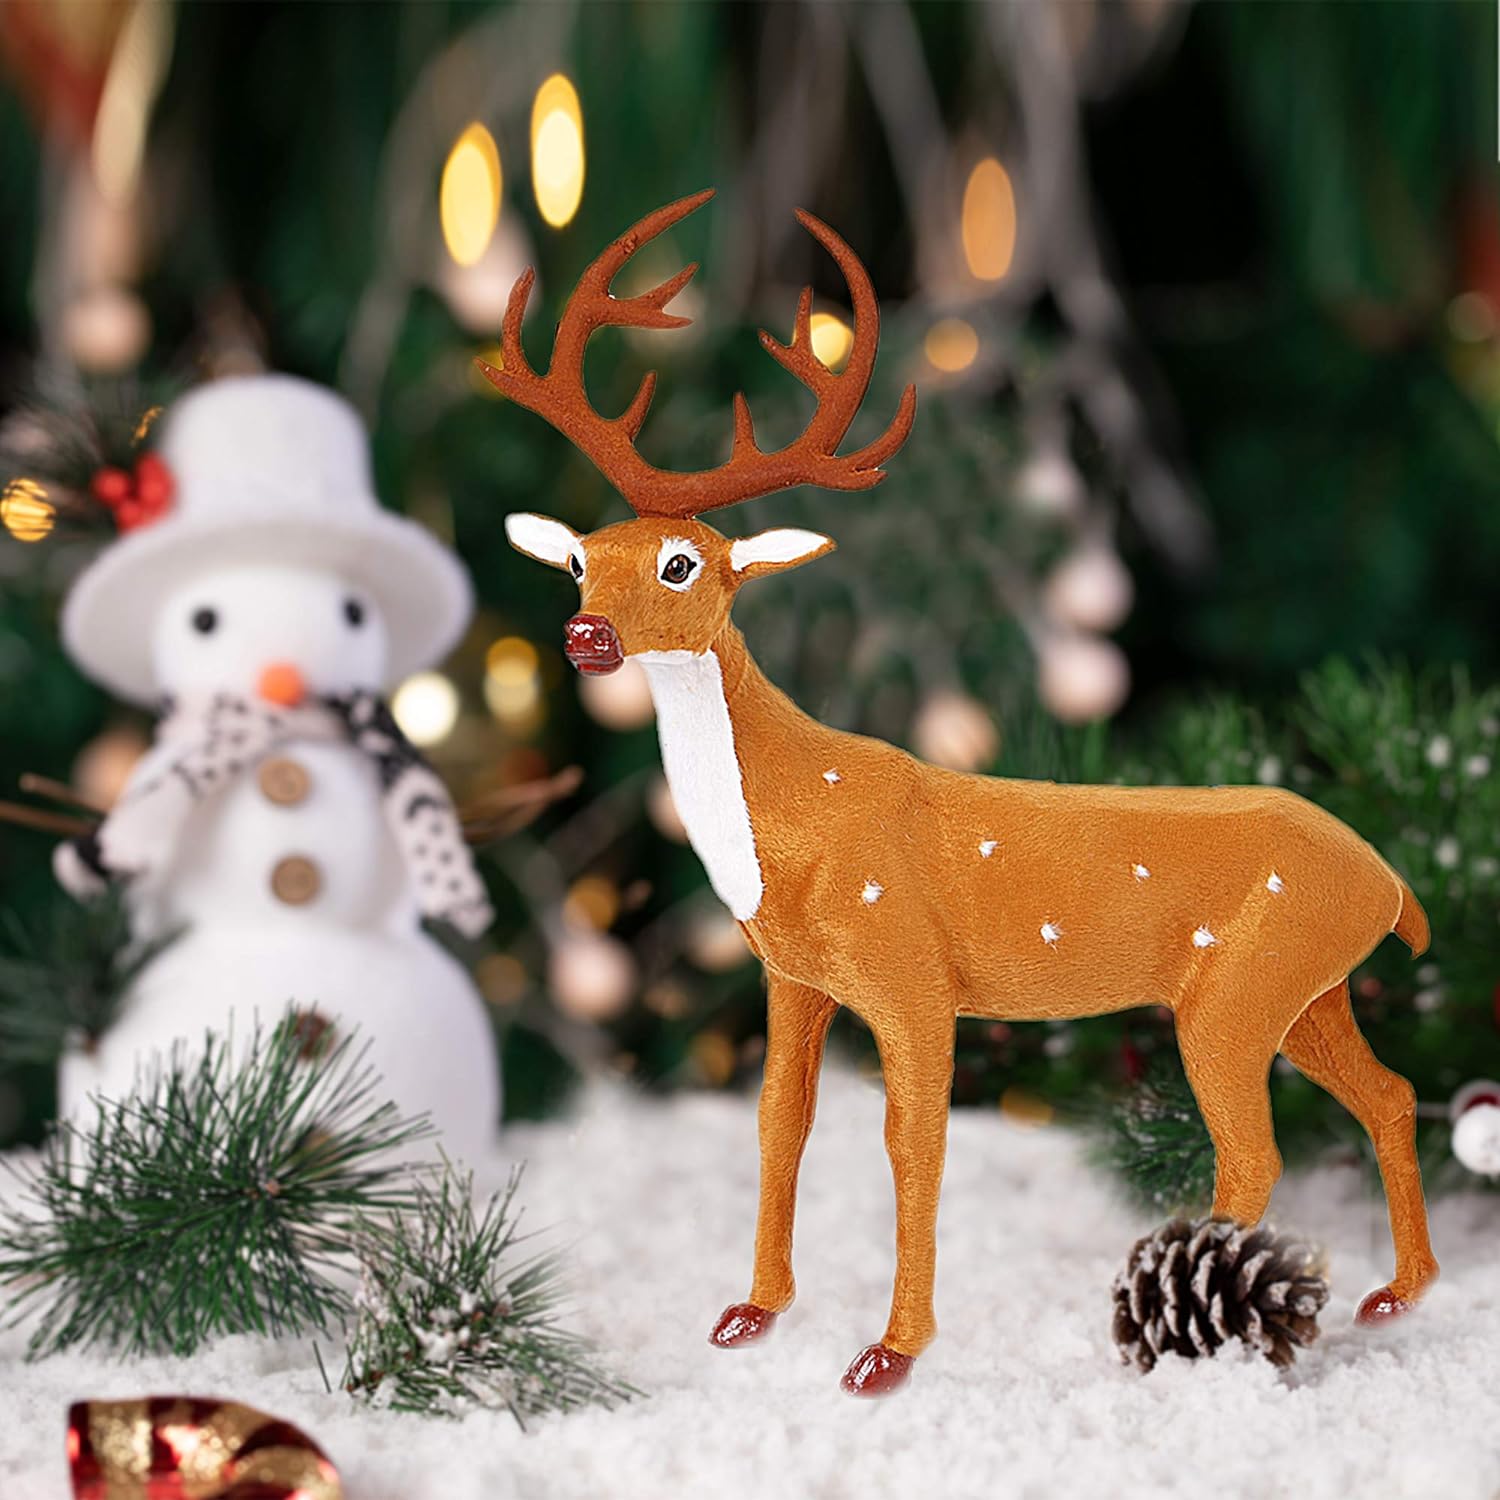 20.1" Craft Christmas Decoration Ornaments Simulation Christmas Reindeer for Home Festival Gift